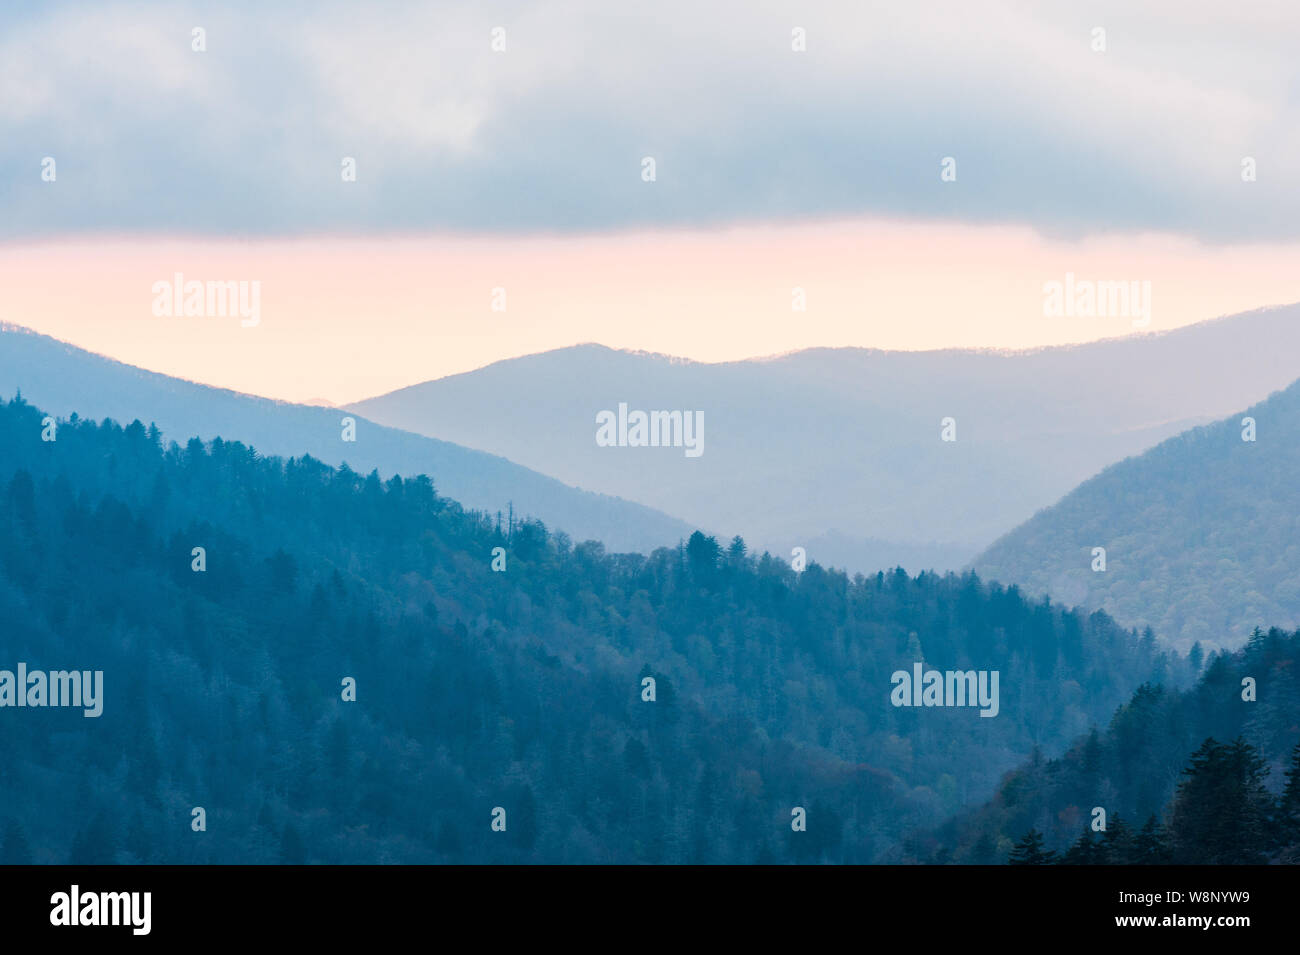 Oconoluftee Overlook is viewed at a colorful sunset evening on the Great Smoky Mountain National Park in Townsend, TN. Stock Photo